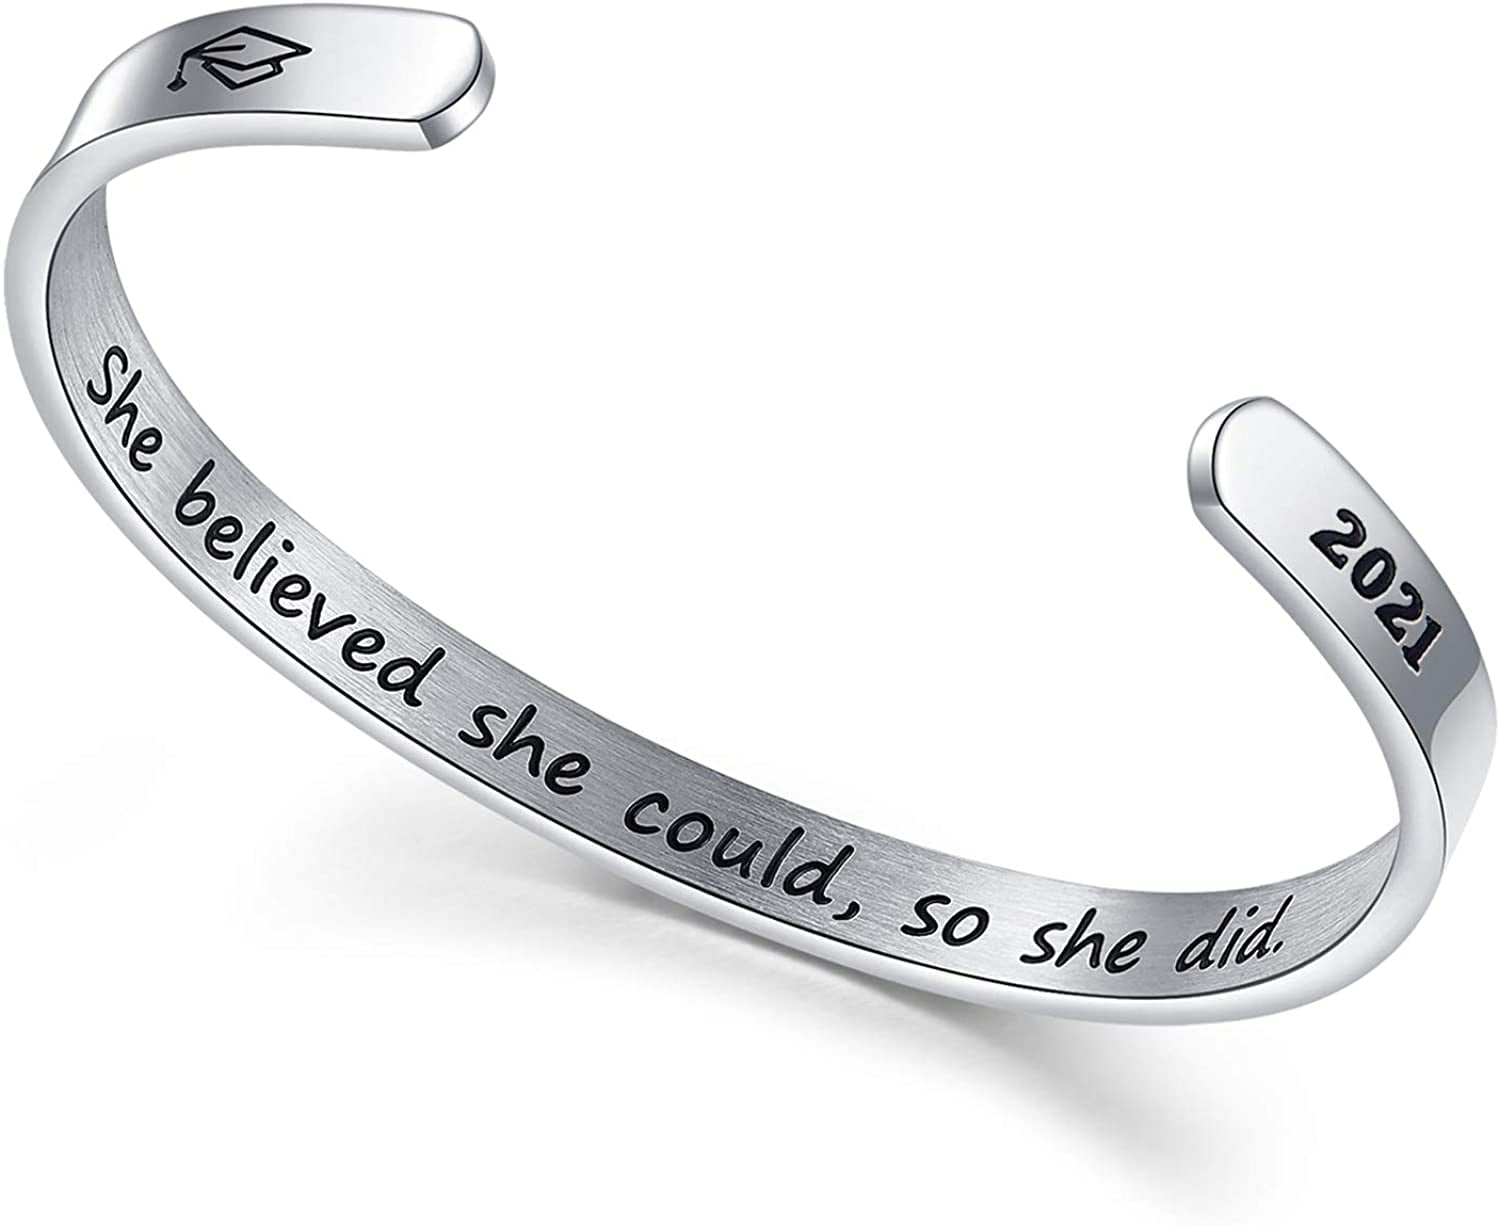 Cuff Bangle Bracelet You Are Braver than You Believe Stainless Steel Inspirational Jewelry 